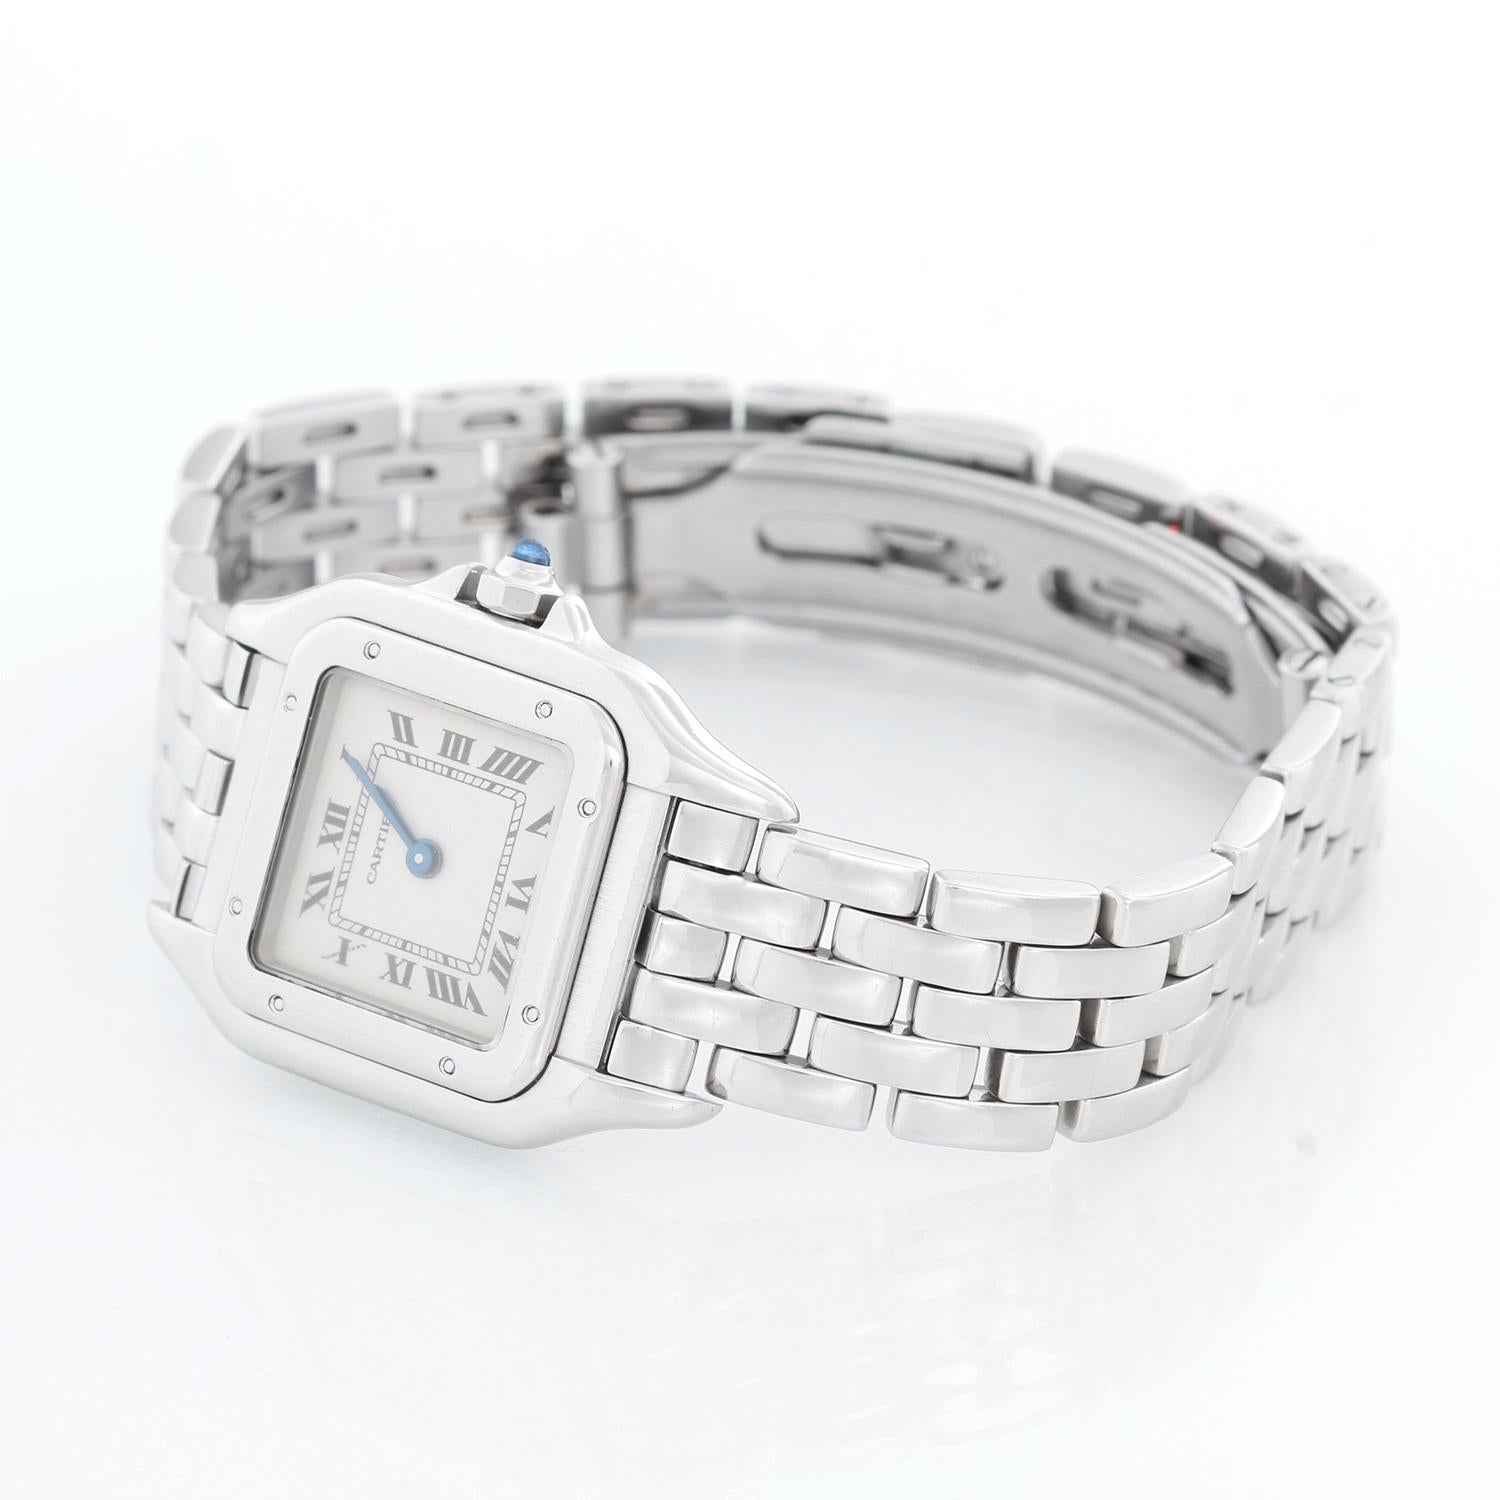 Cartier Panther Ladies Stainless Steel Panthere Watch W25033P5 1320 - Quartz. Stainless steel case (21mm x 30mm). Ivory colored dial with black Roman numerals. Stainless steel Panthere bracelet. Pre-owned with Cartier box and papers .